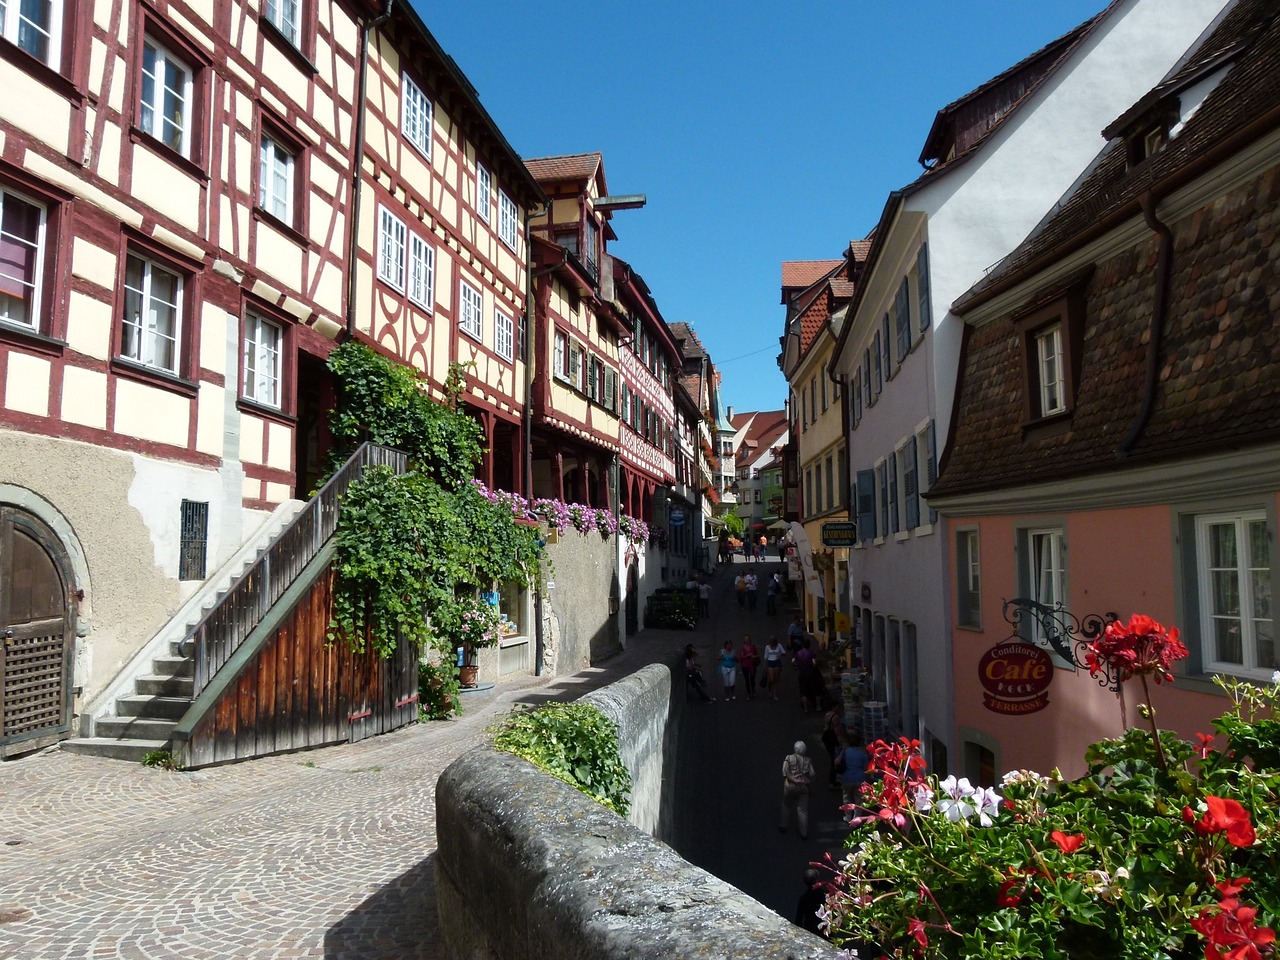 a couple of buildings that are next to each other, by Sigmund Freudenberger, flickr, renaissance, built on a steep hill, flowers, ox, warhammrer